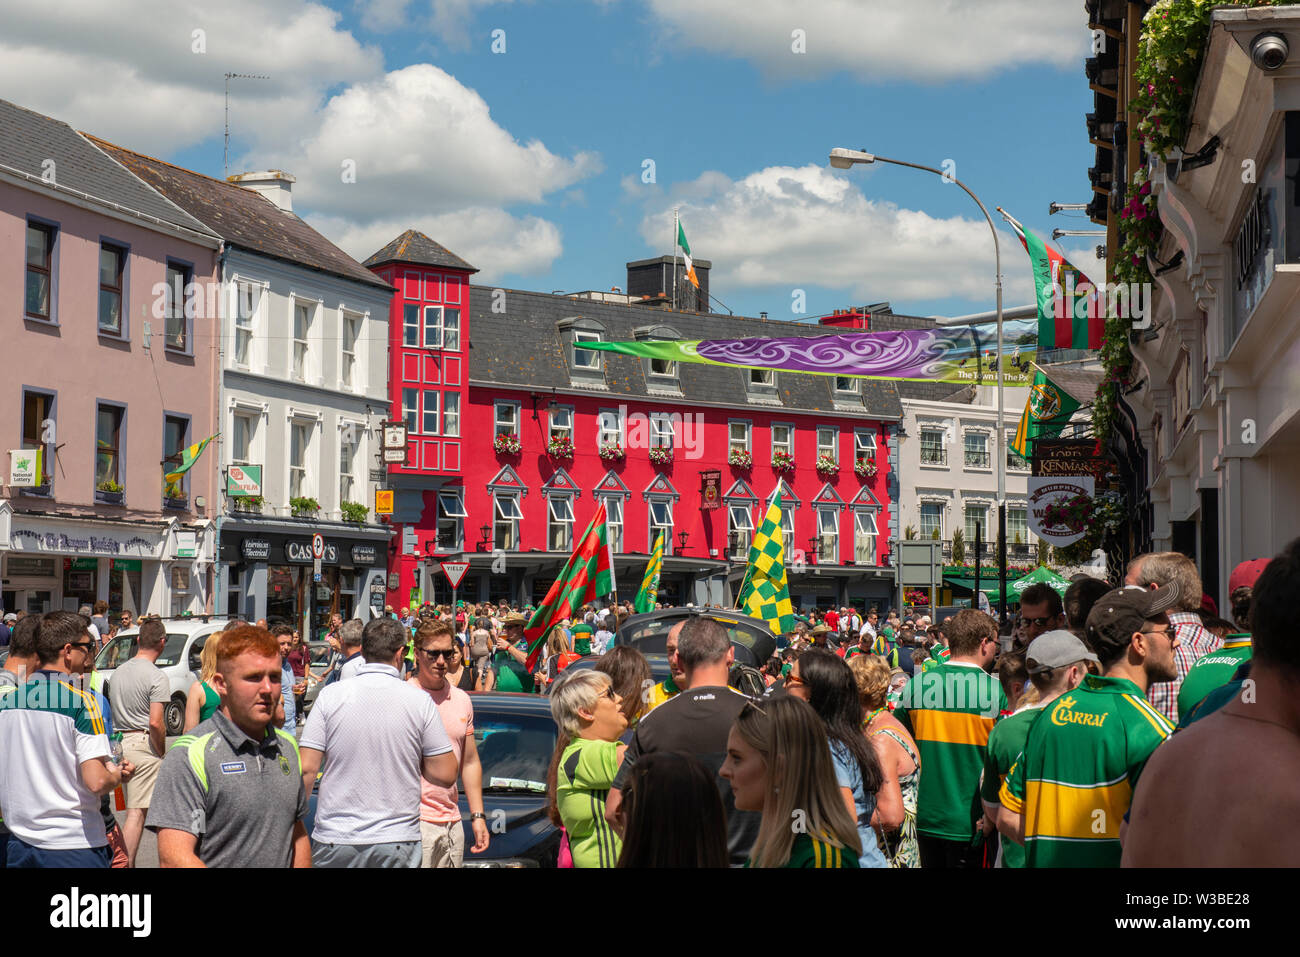 Matchday in Killarney, County Kerry, Ireland. Gaelic football fans supporters on a match day in the College Street. The town of Killarney packed with football supporters on bright sunny day. Stock Photo